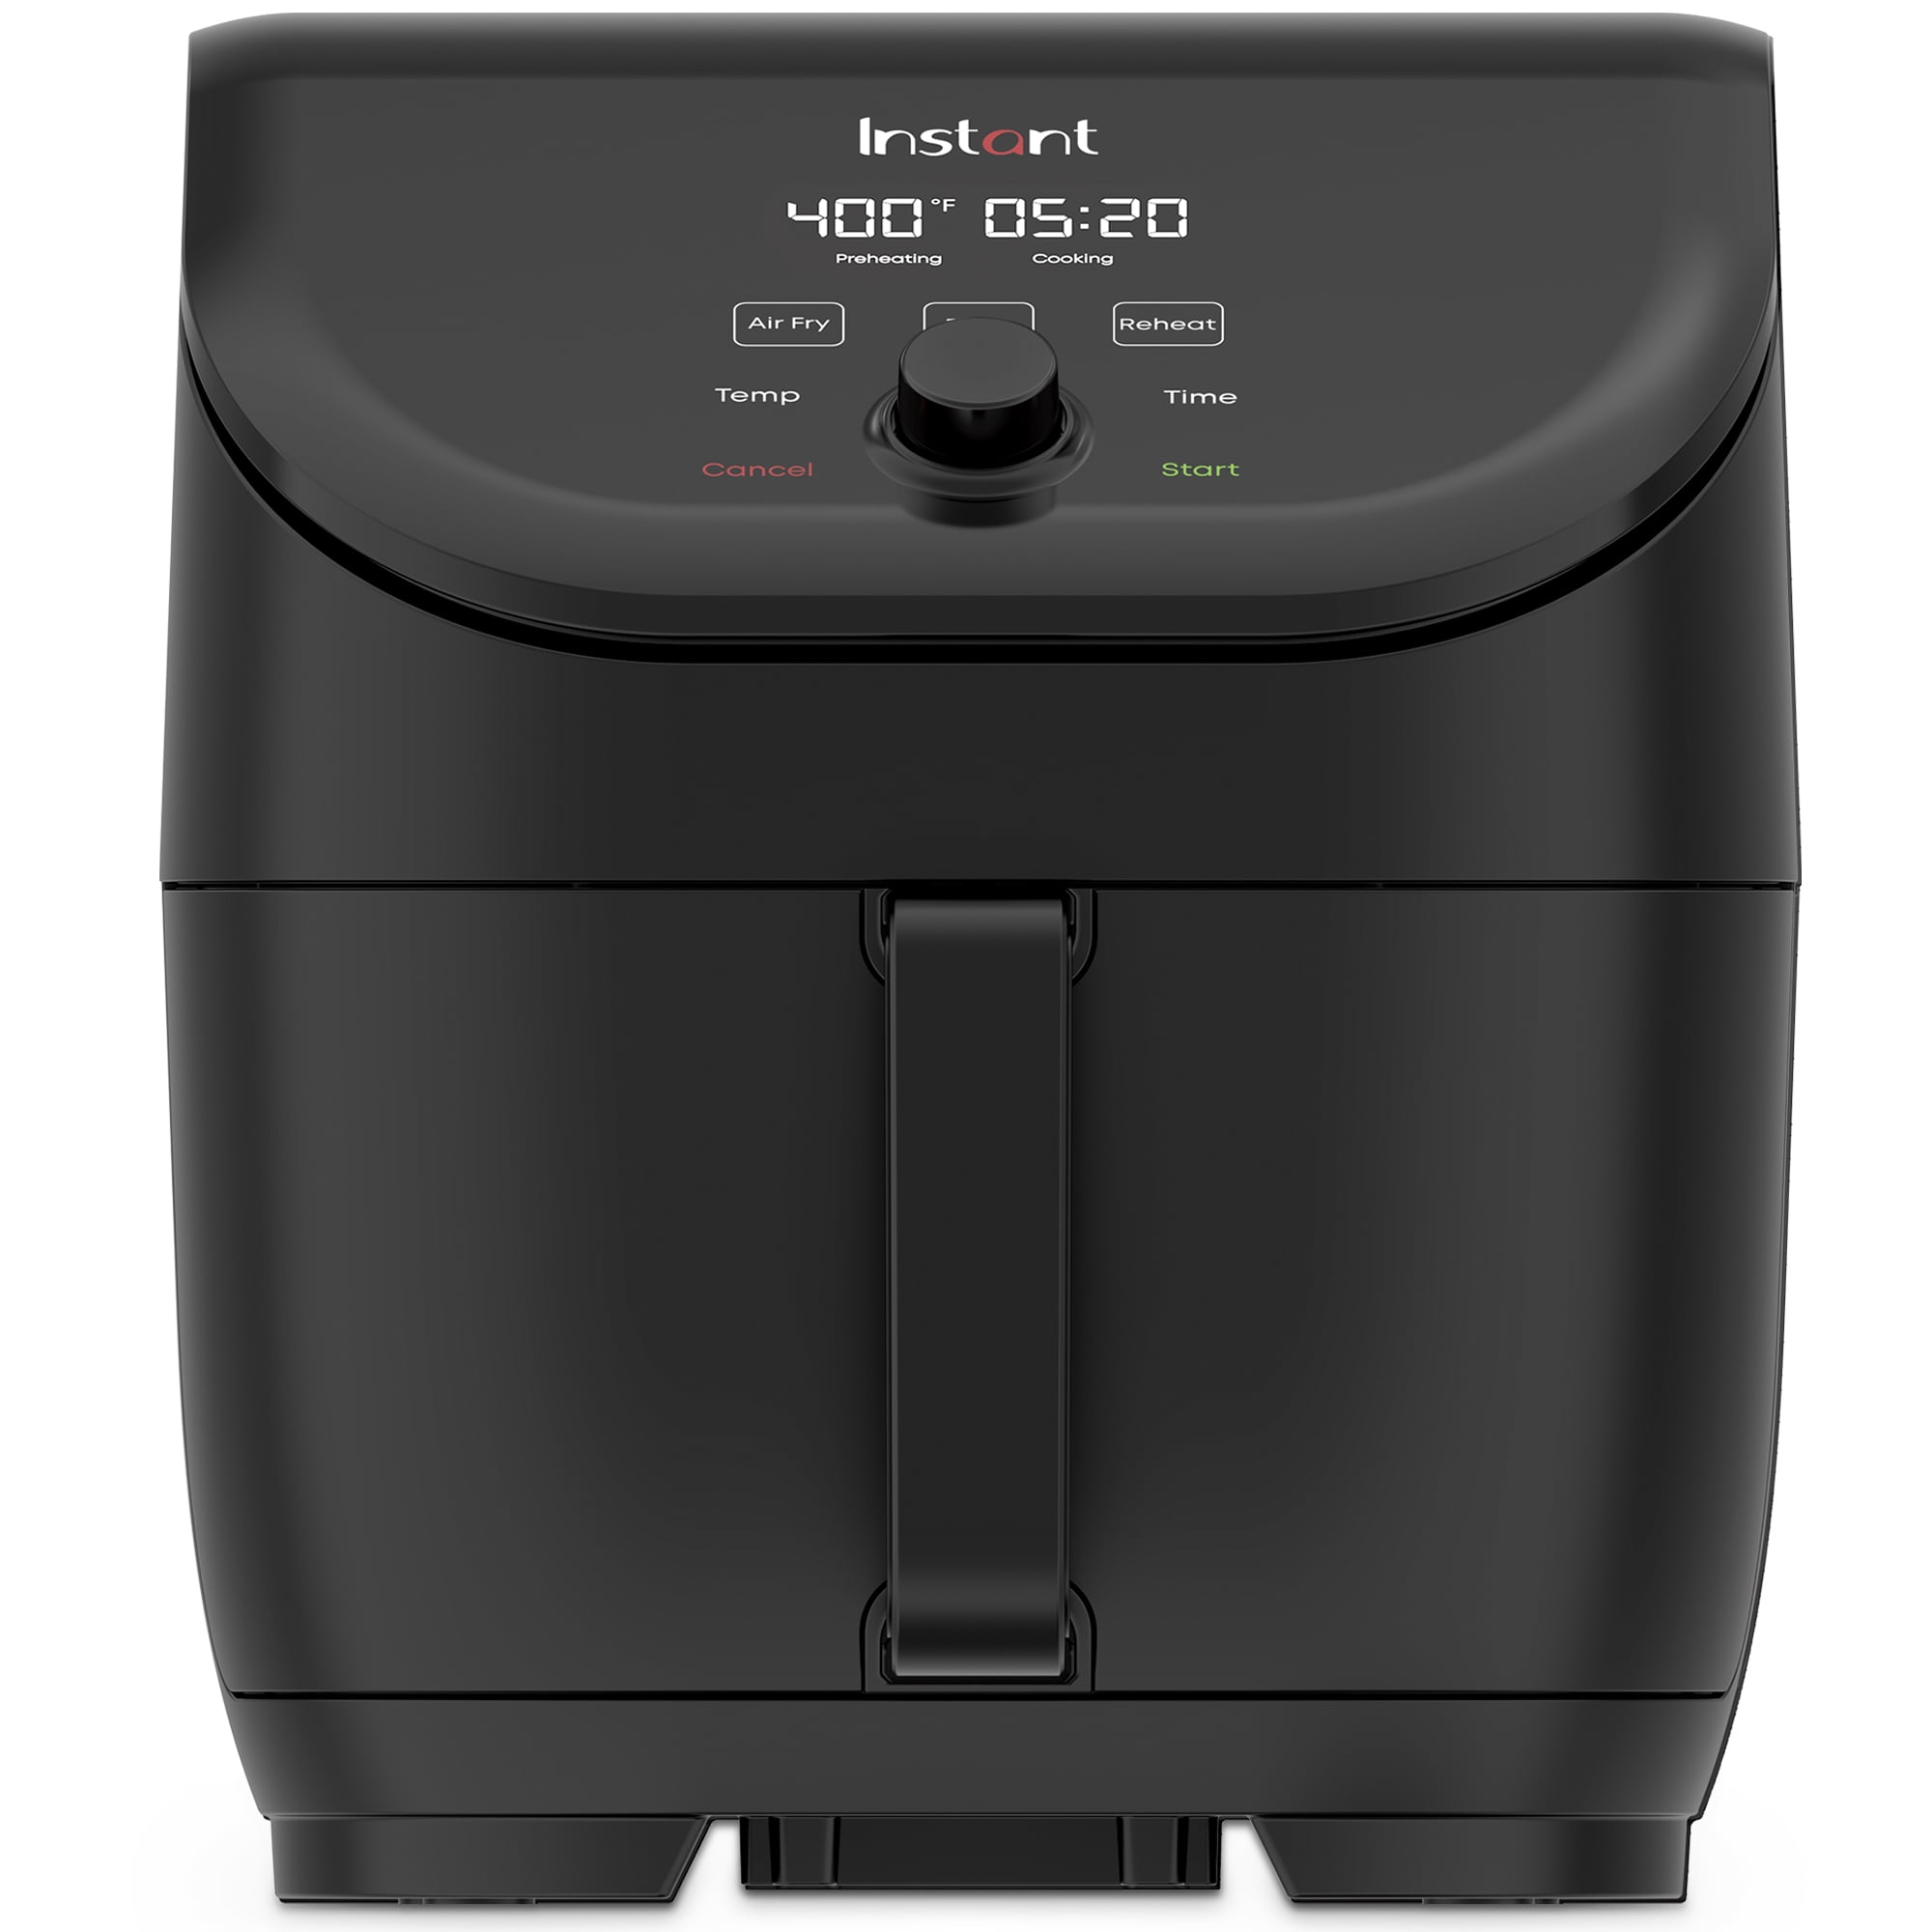 Instant™ Vortex® Plus 6-quart Stainless Steel Air Fryer with ClearCook and  OdorErase